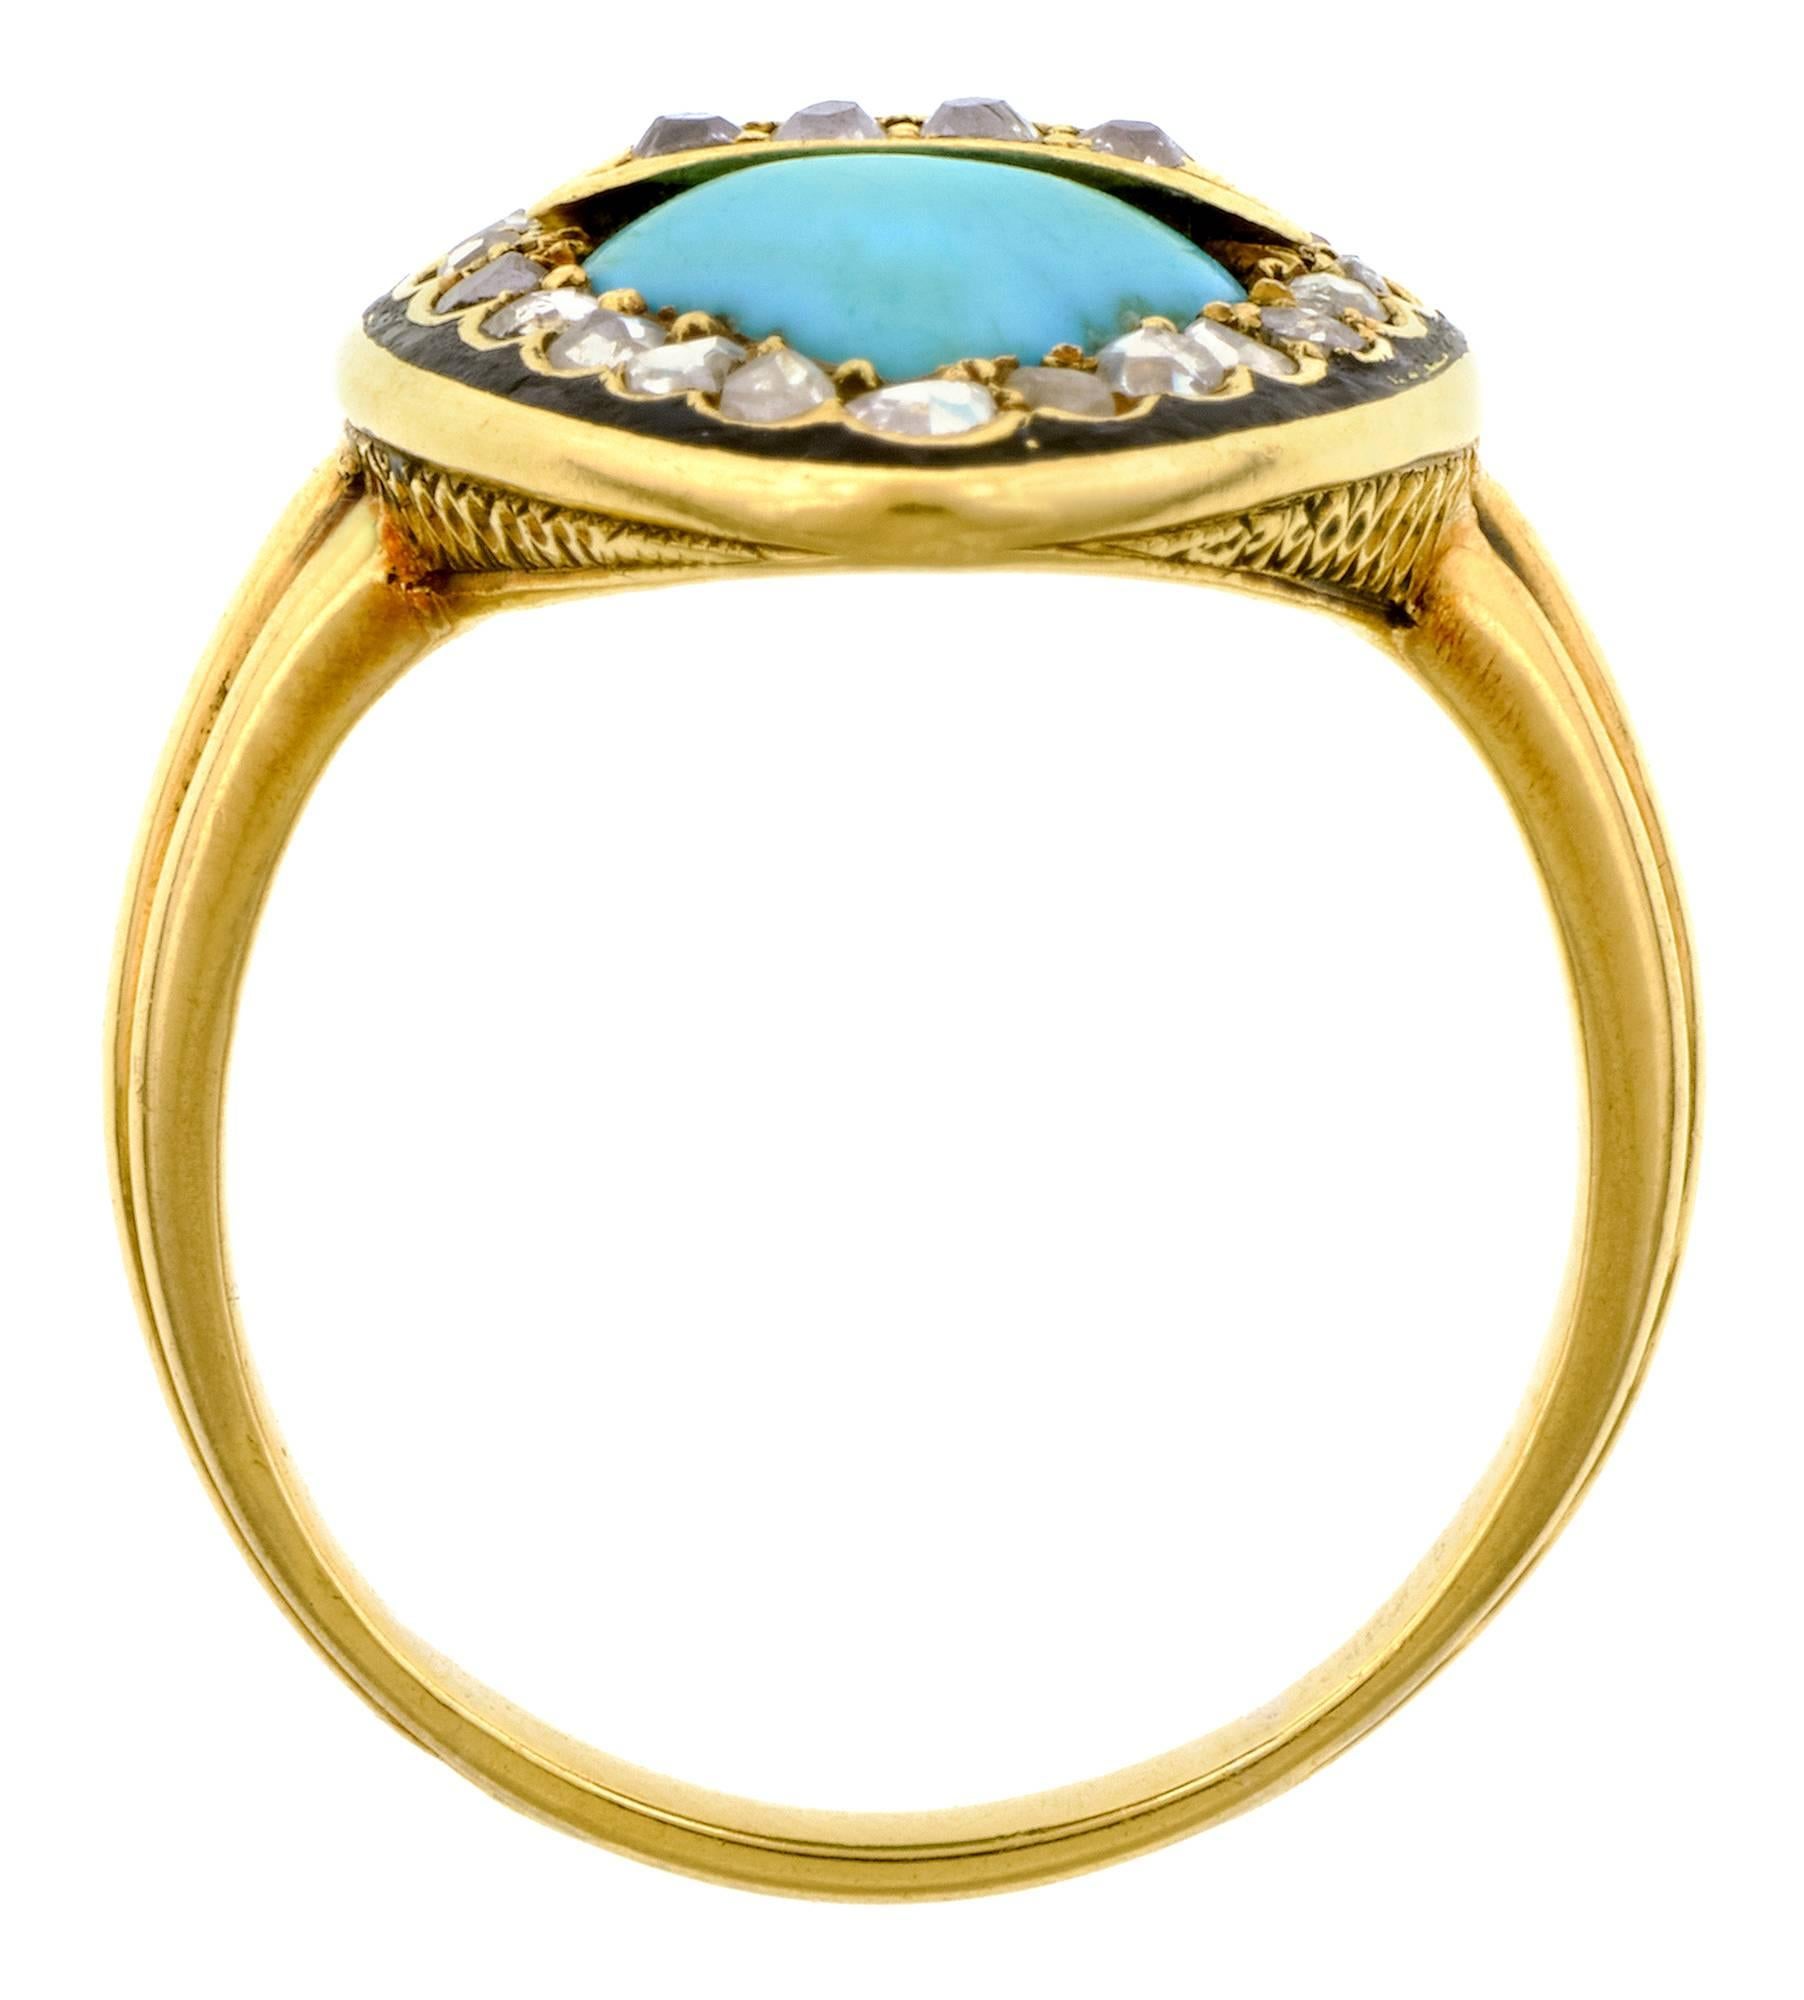 Women's Circa 1895 French Victorian Turquoise Diamond Gold Ring